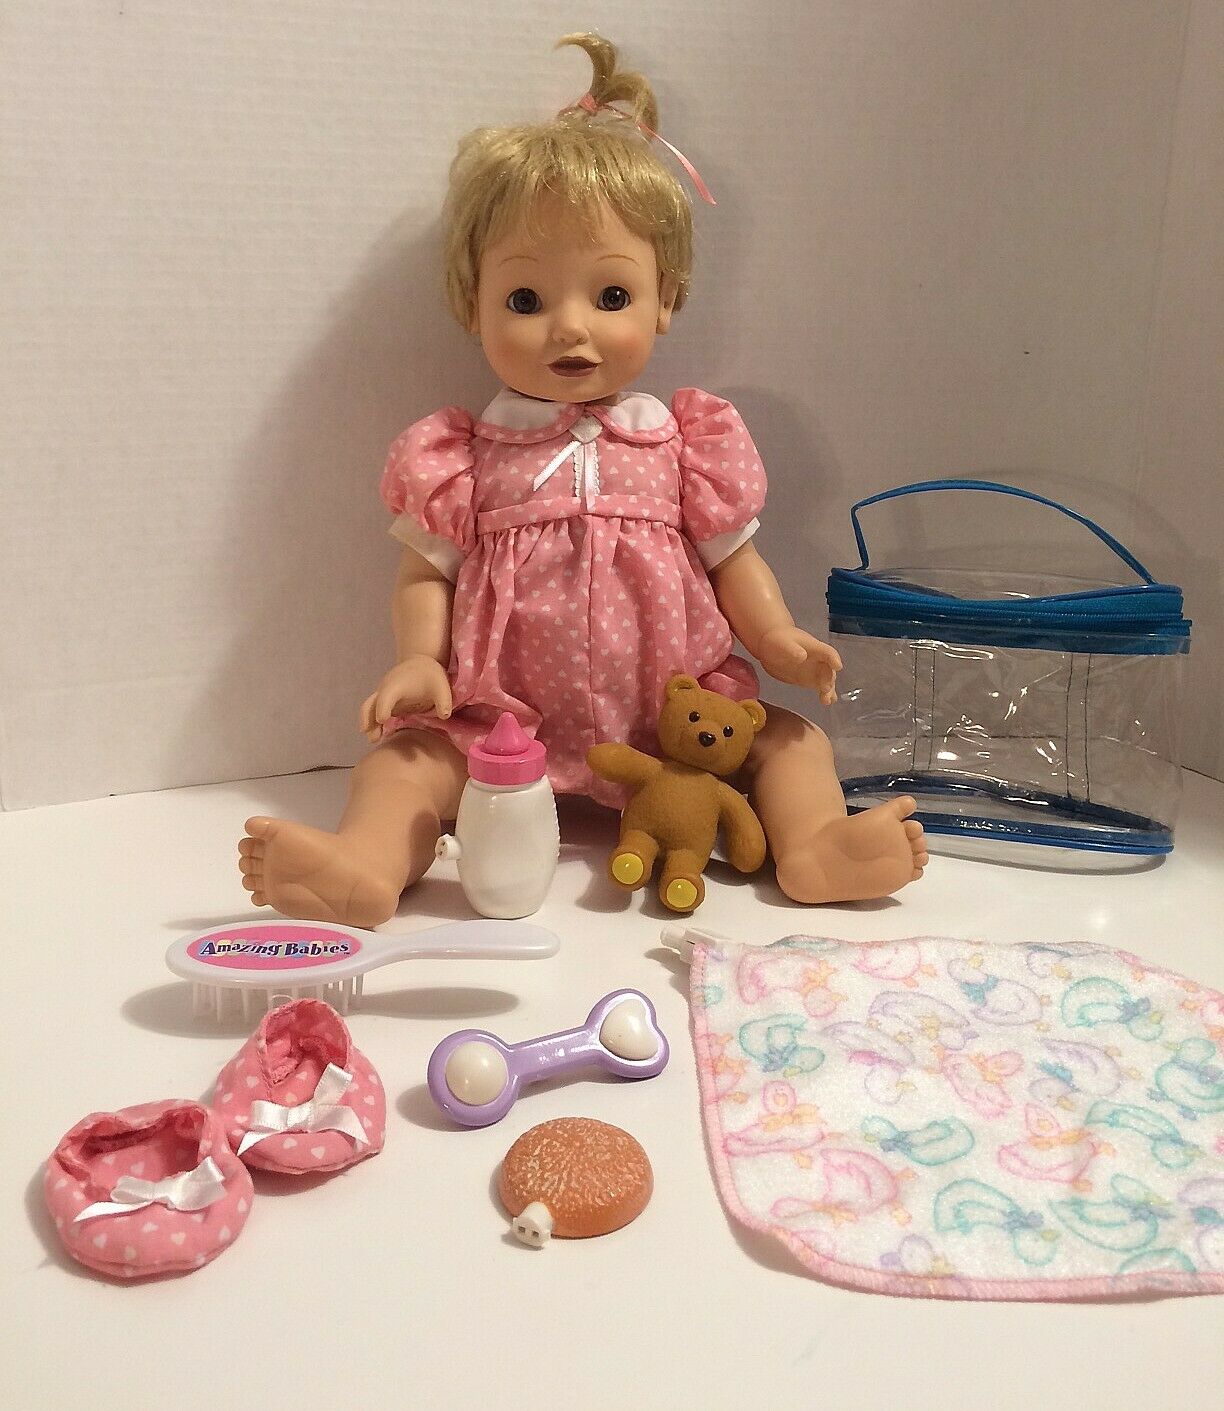 Playmates 2000  Amazing Babies Blond Interactive Doll & Accessories - Needs work